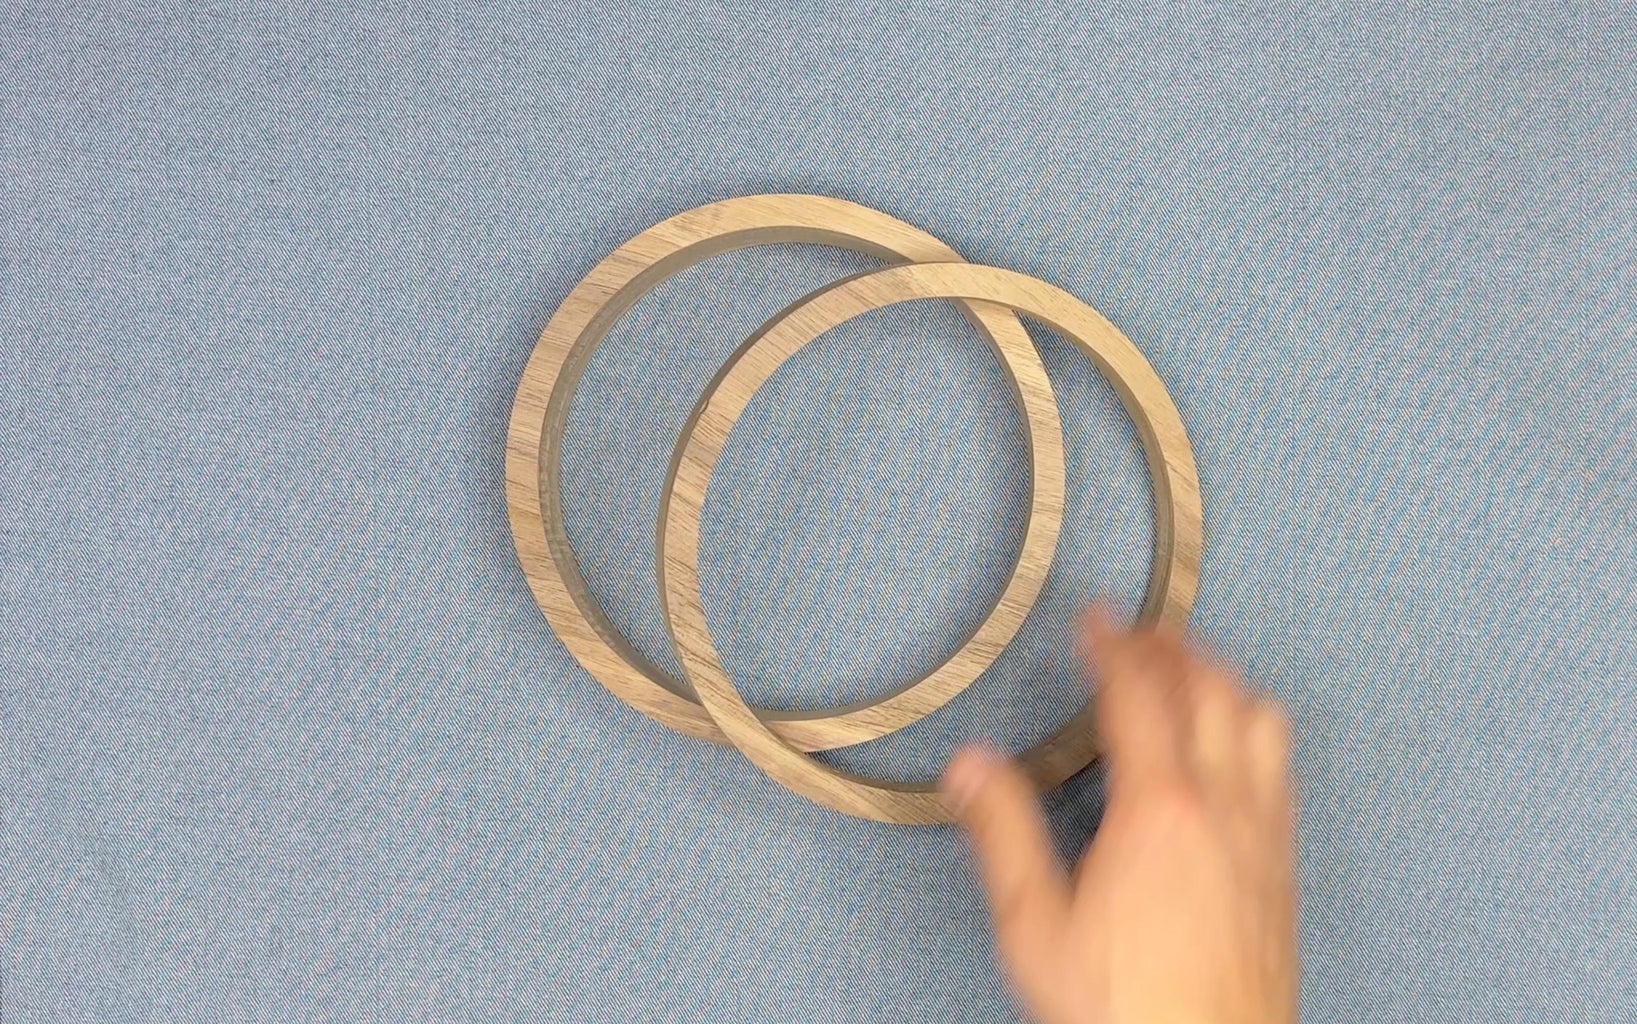 Cut the Rings From the Thicker and Thinner Workpiece